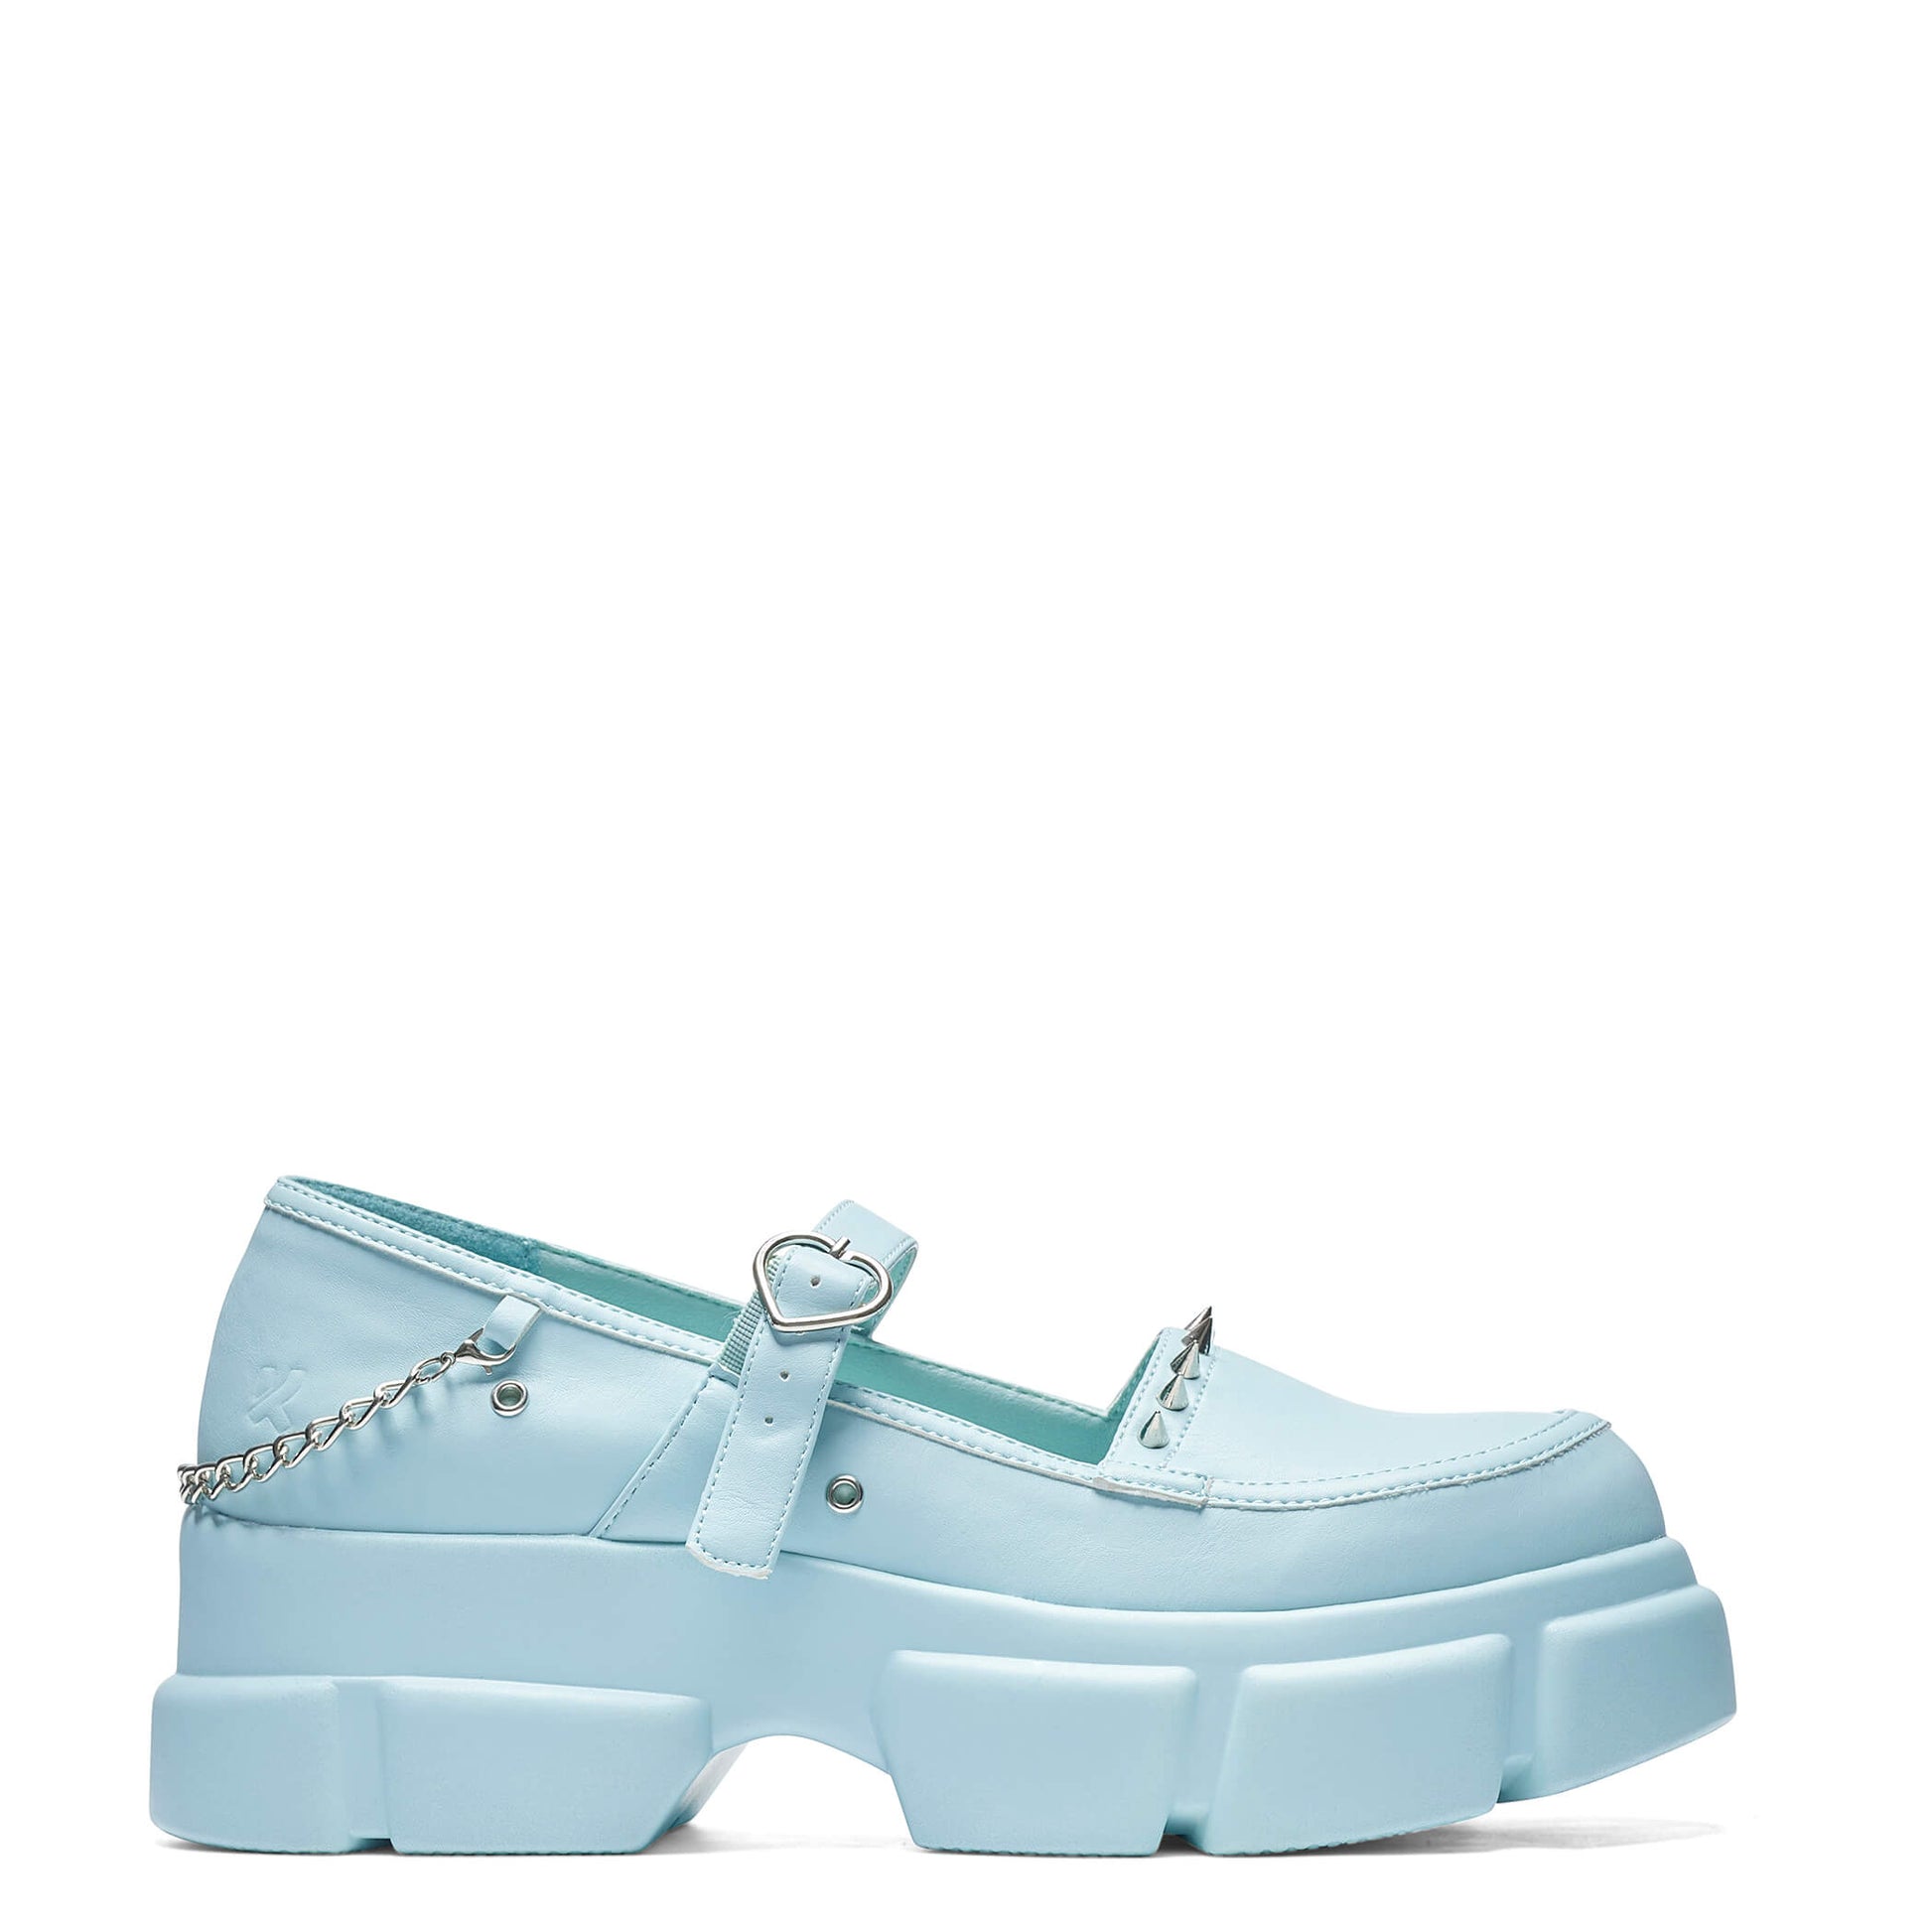 Cloud Mist Chunky Shoes - Baby Blue - Shoes - KOI Footwear - Blue - Side View